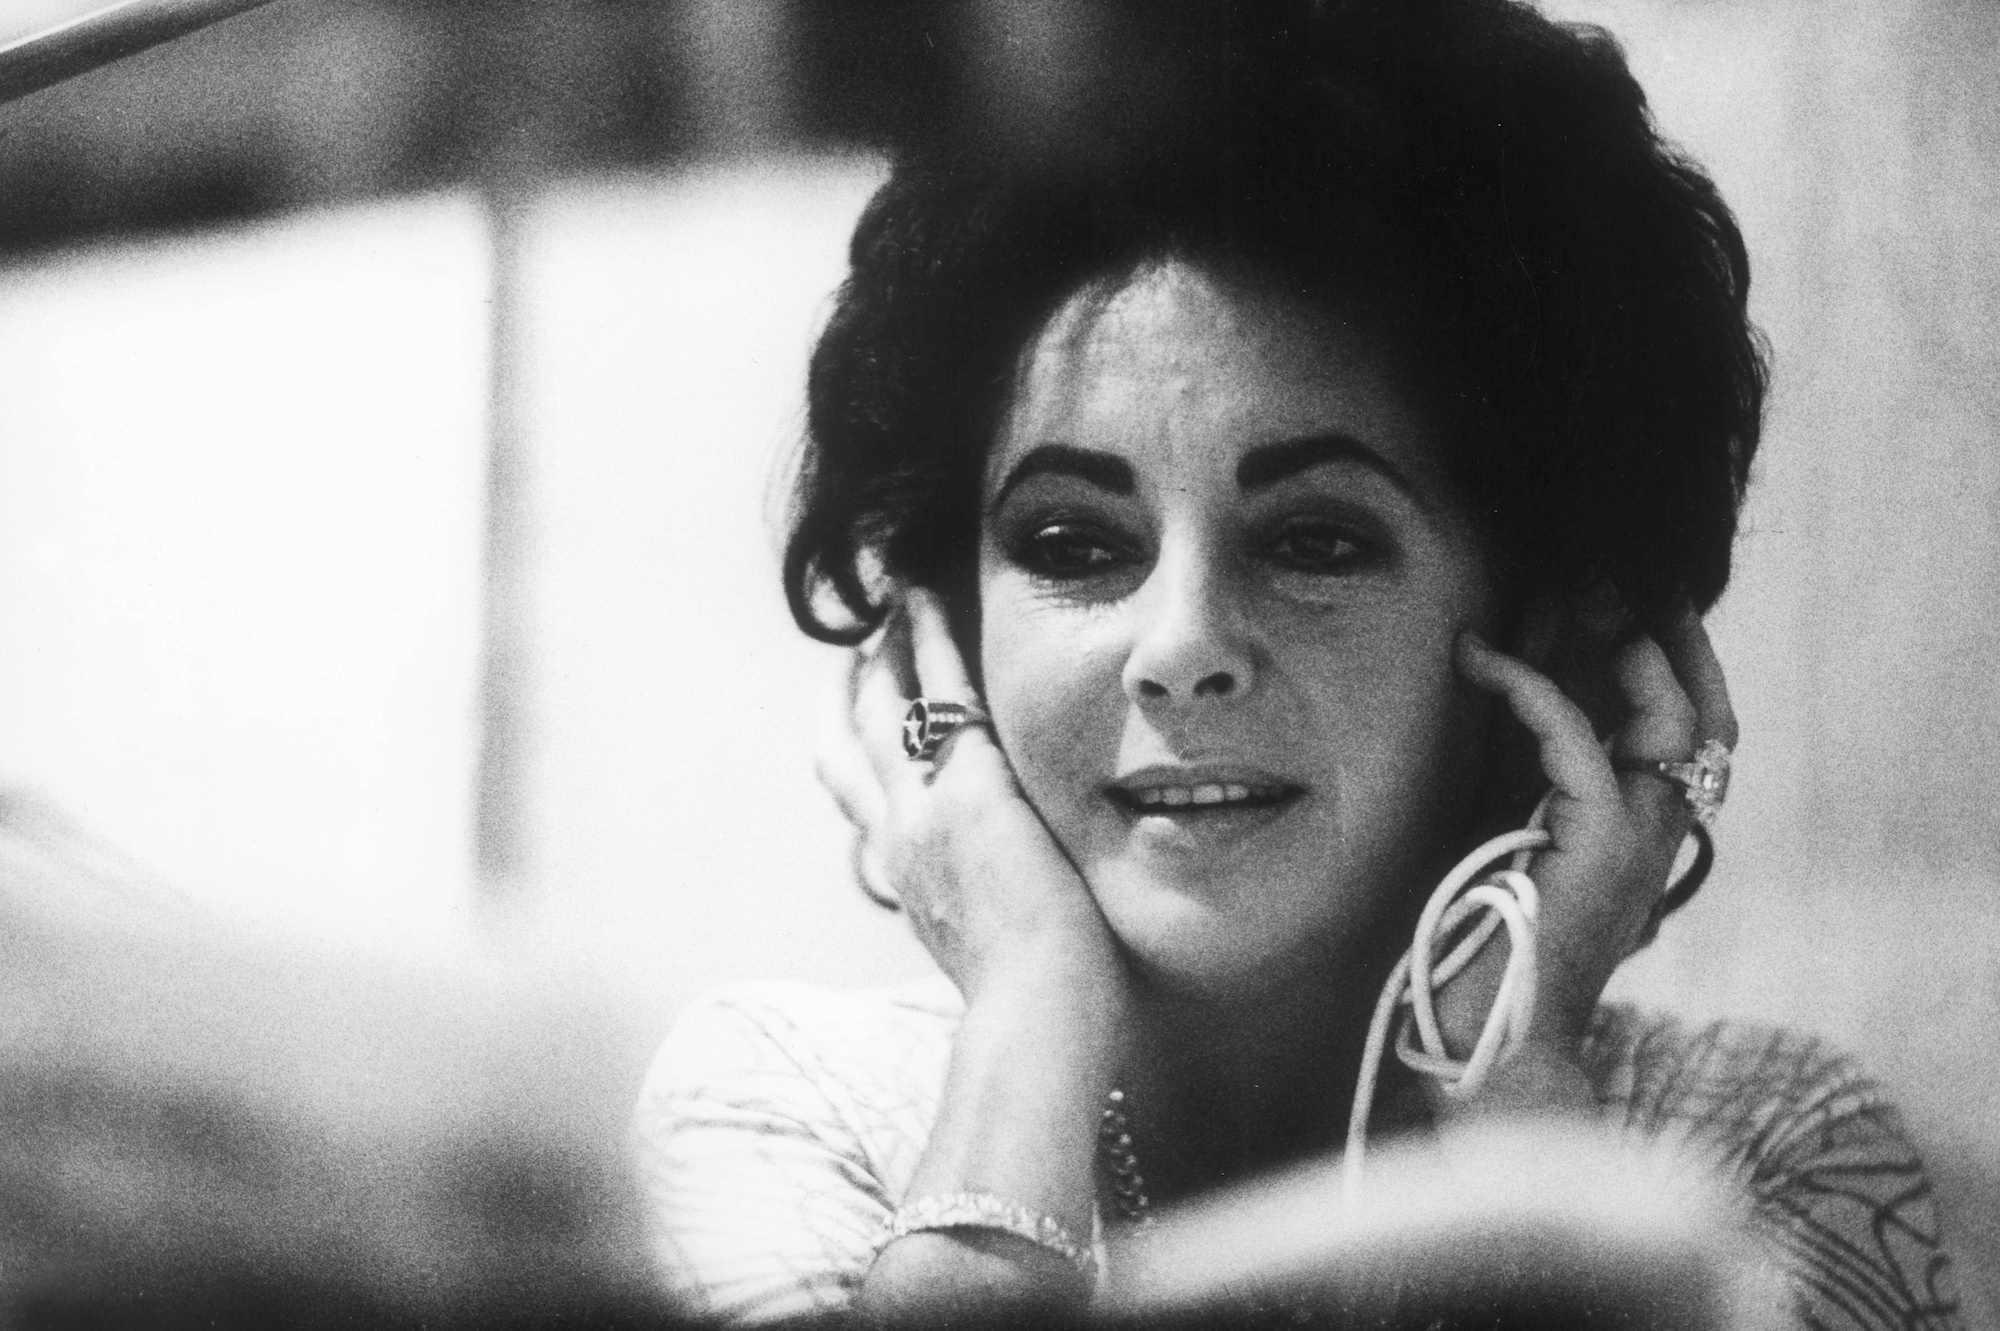 Elizabeth Taylor smiling, looking down, in black and white